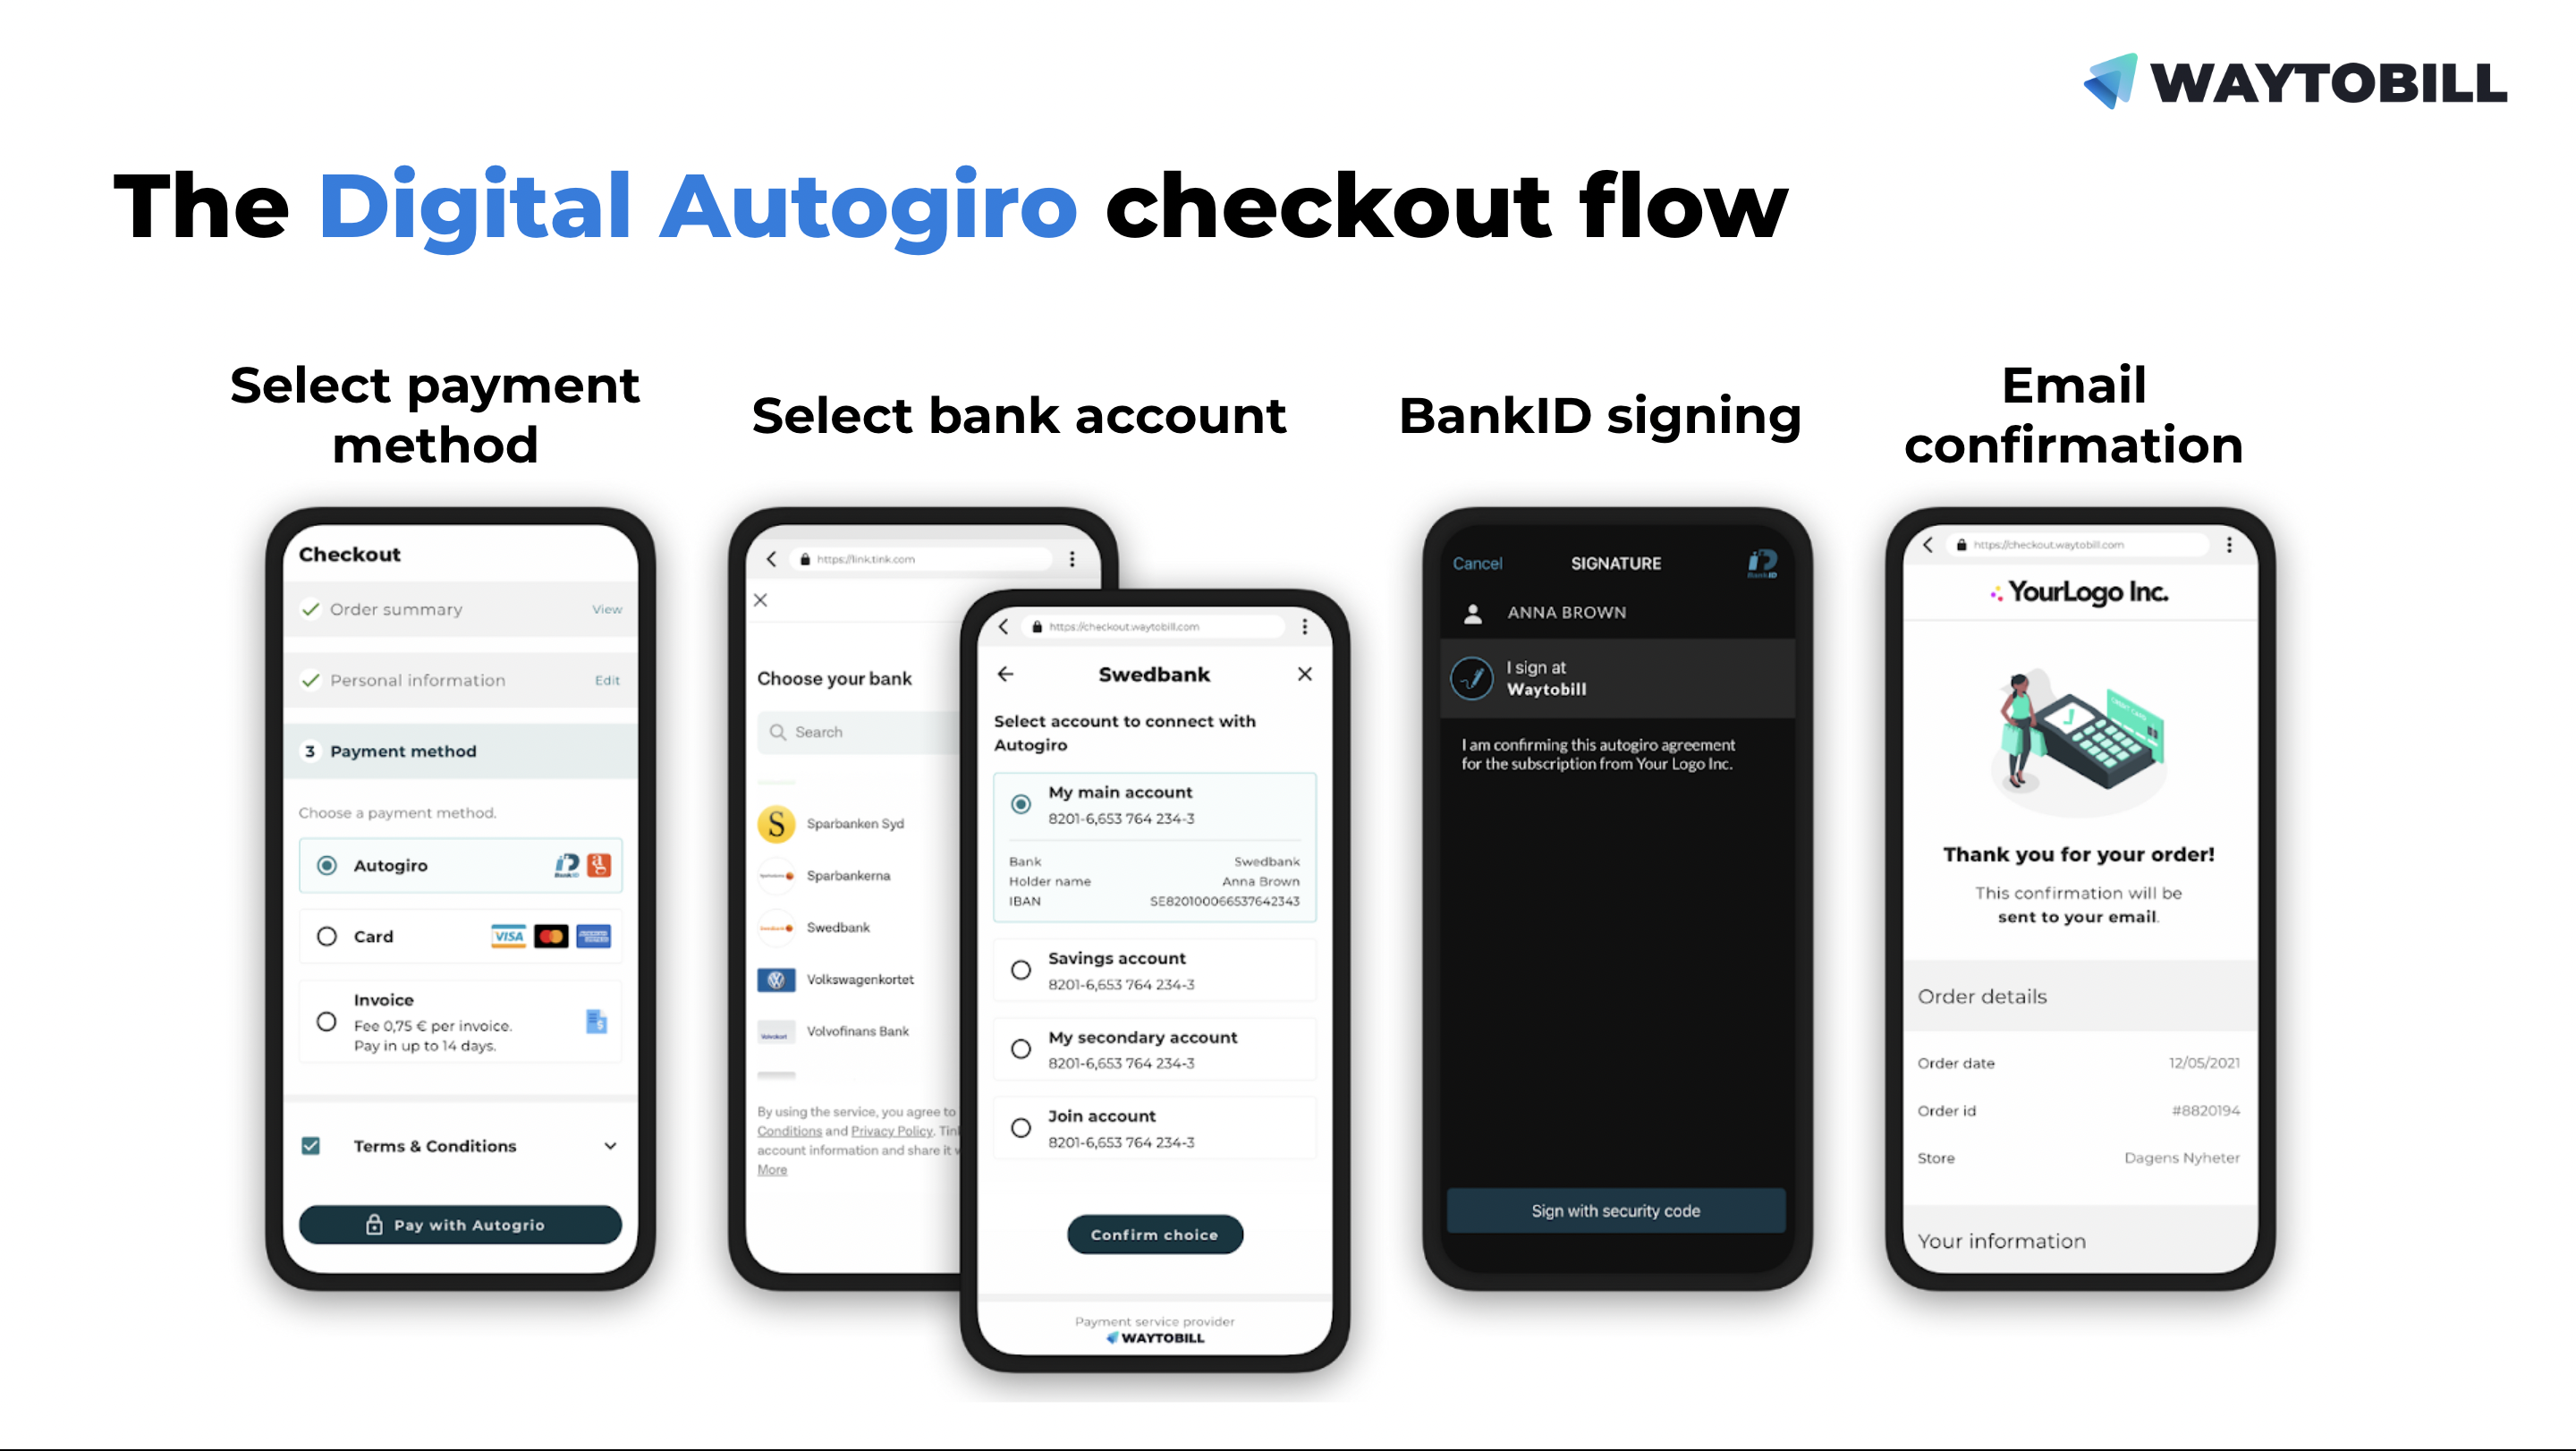 Digital autogiro payment flow showing the four-step checkout when choosing digital autogiro as the preferred payment method.